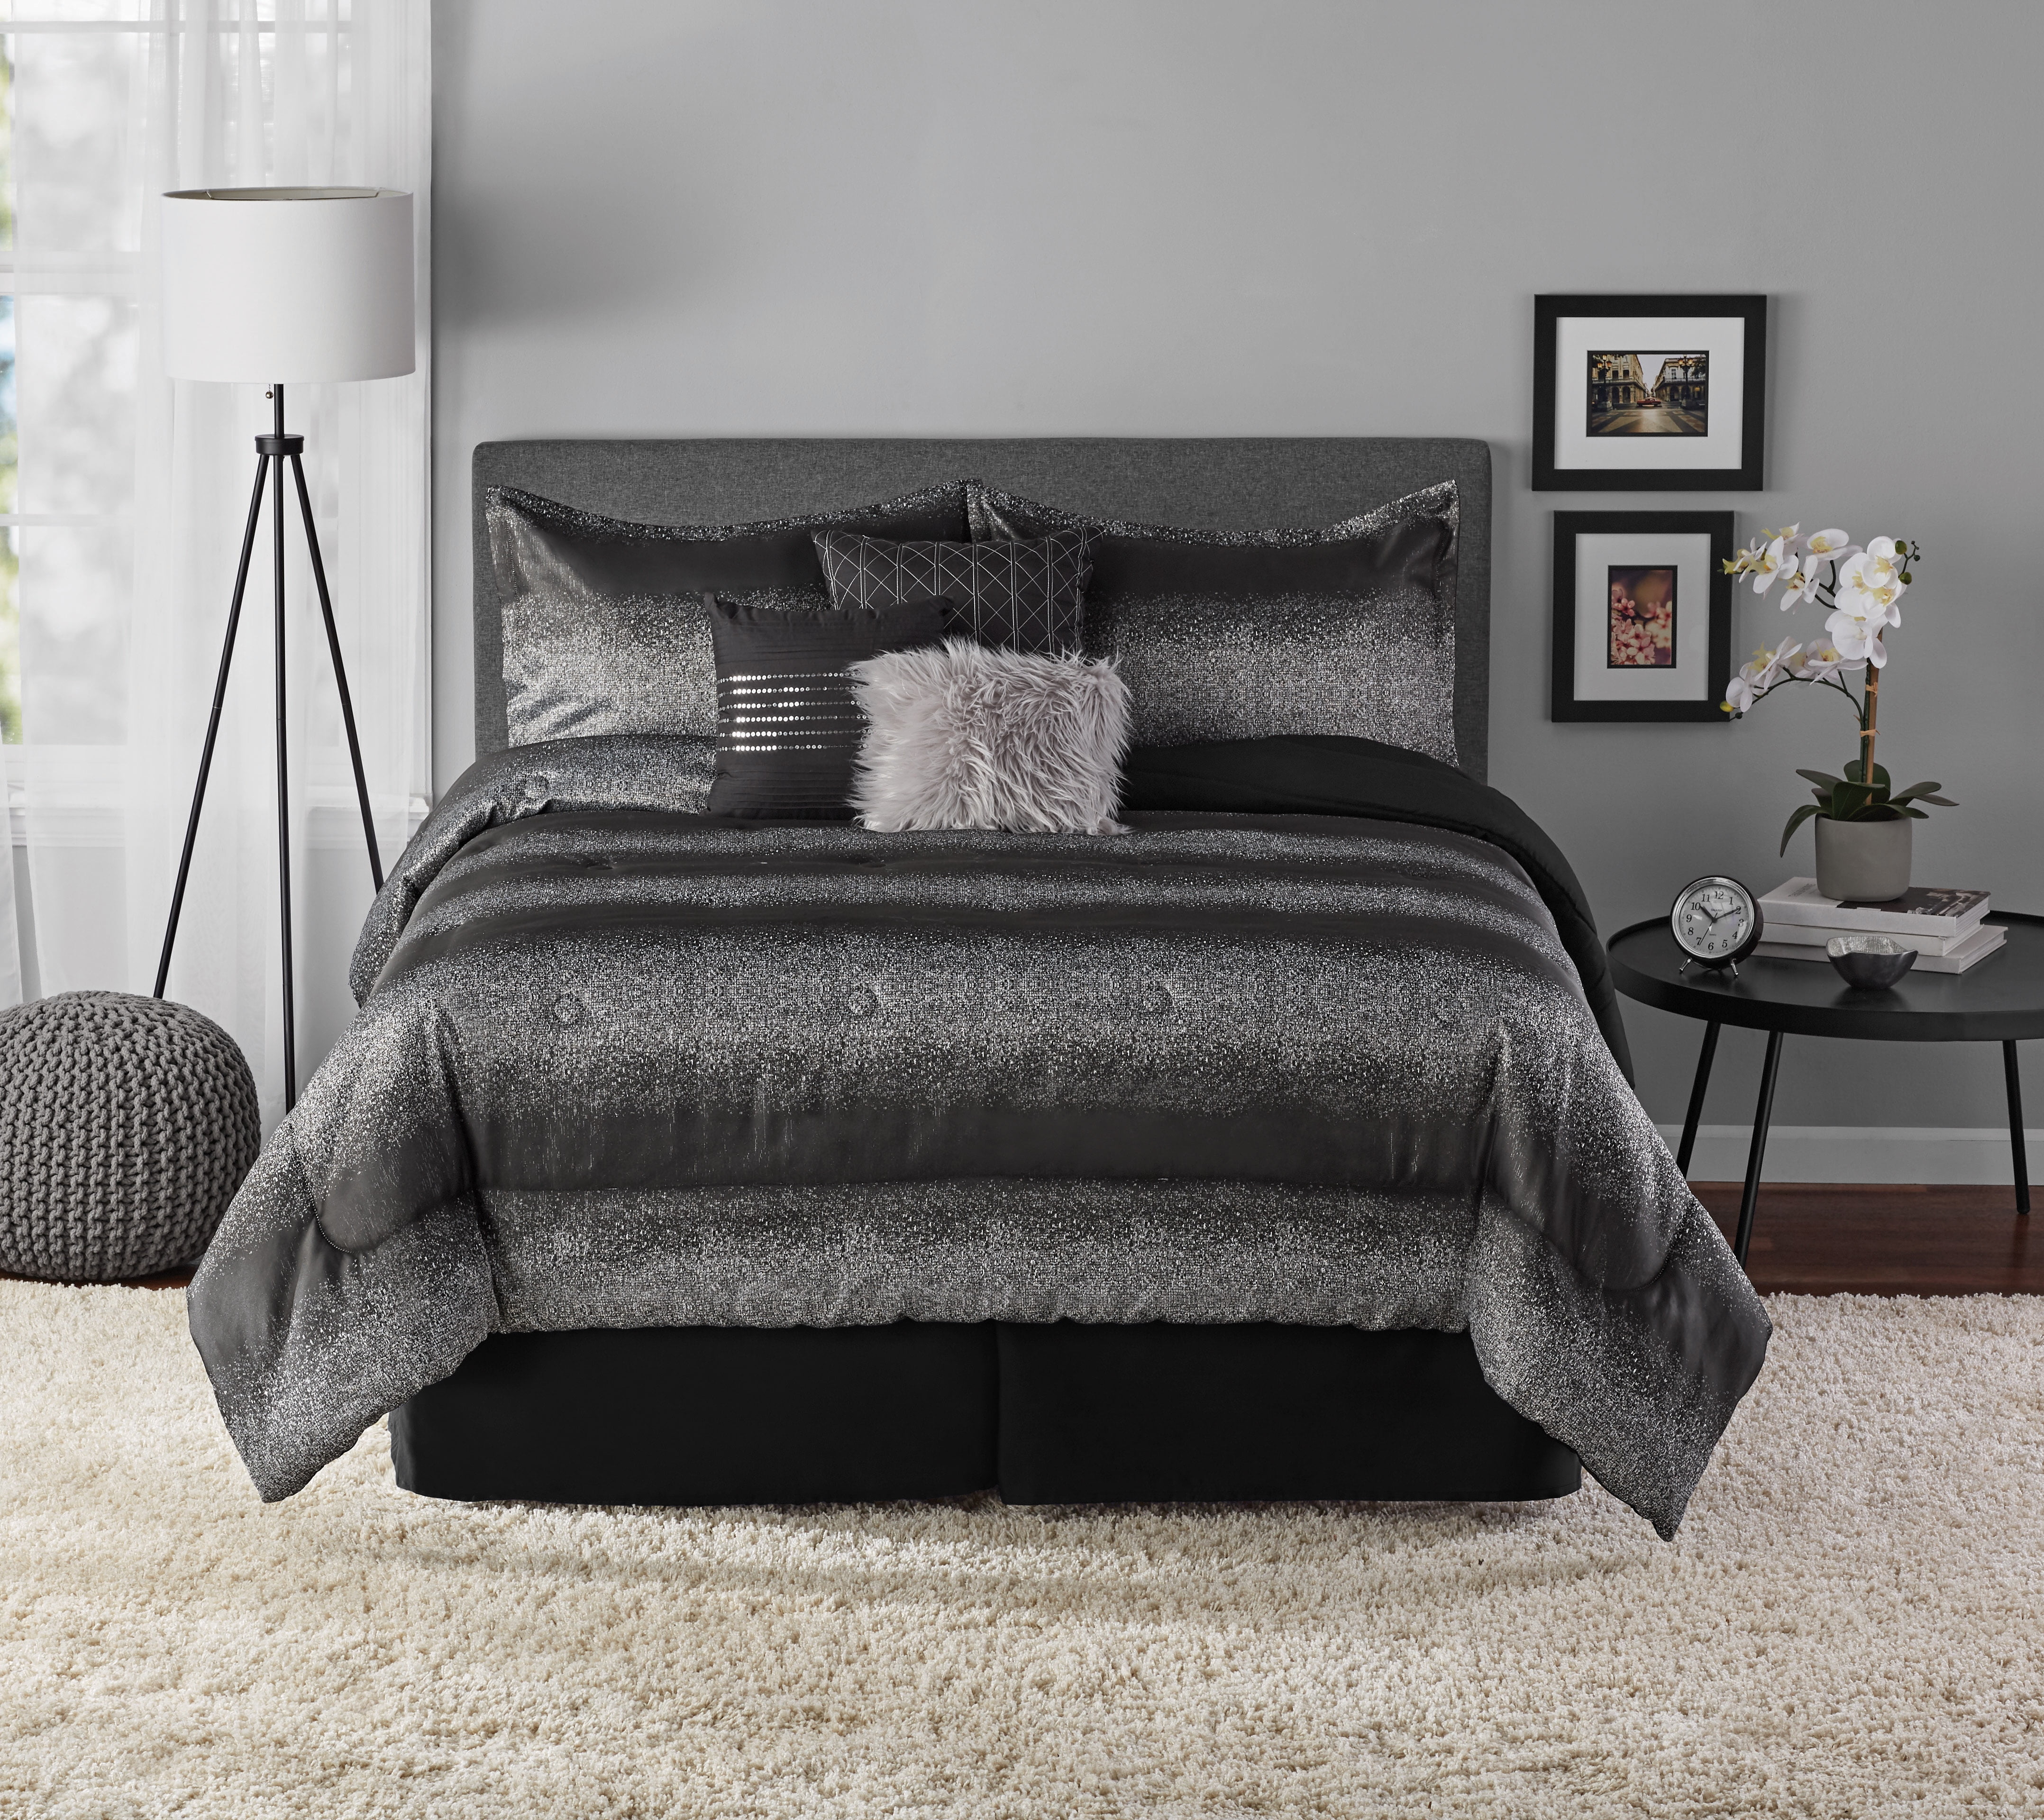 New 7 pc Classic Jacquard Grey Damask Cal King Queen Comforter Set Free Shipping 